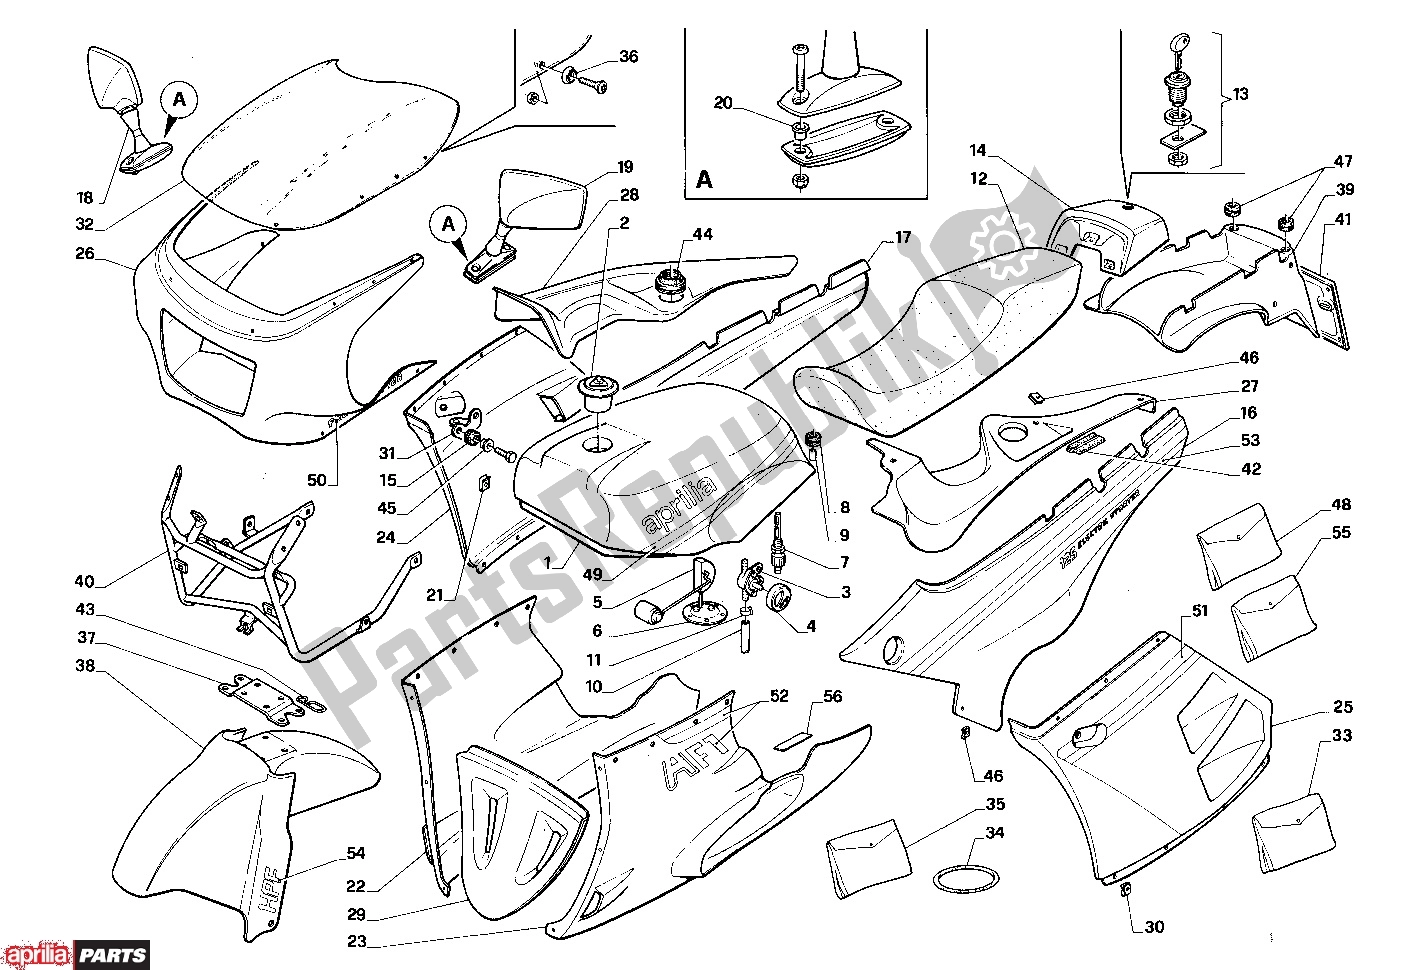 All parts for the Body of the Aprilia AF1 304 125 1987